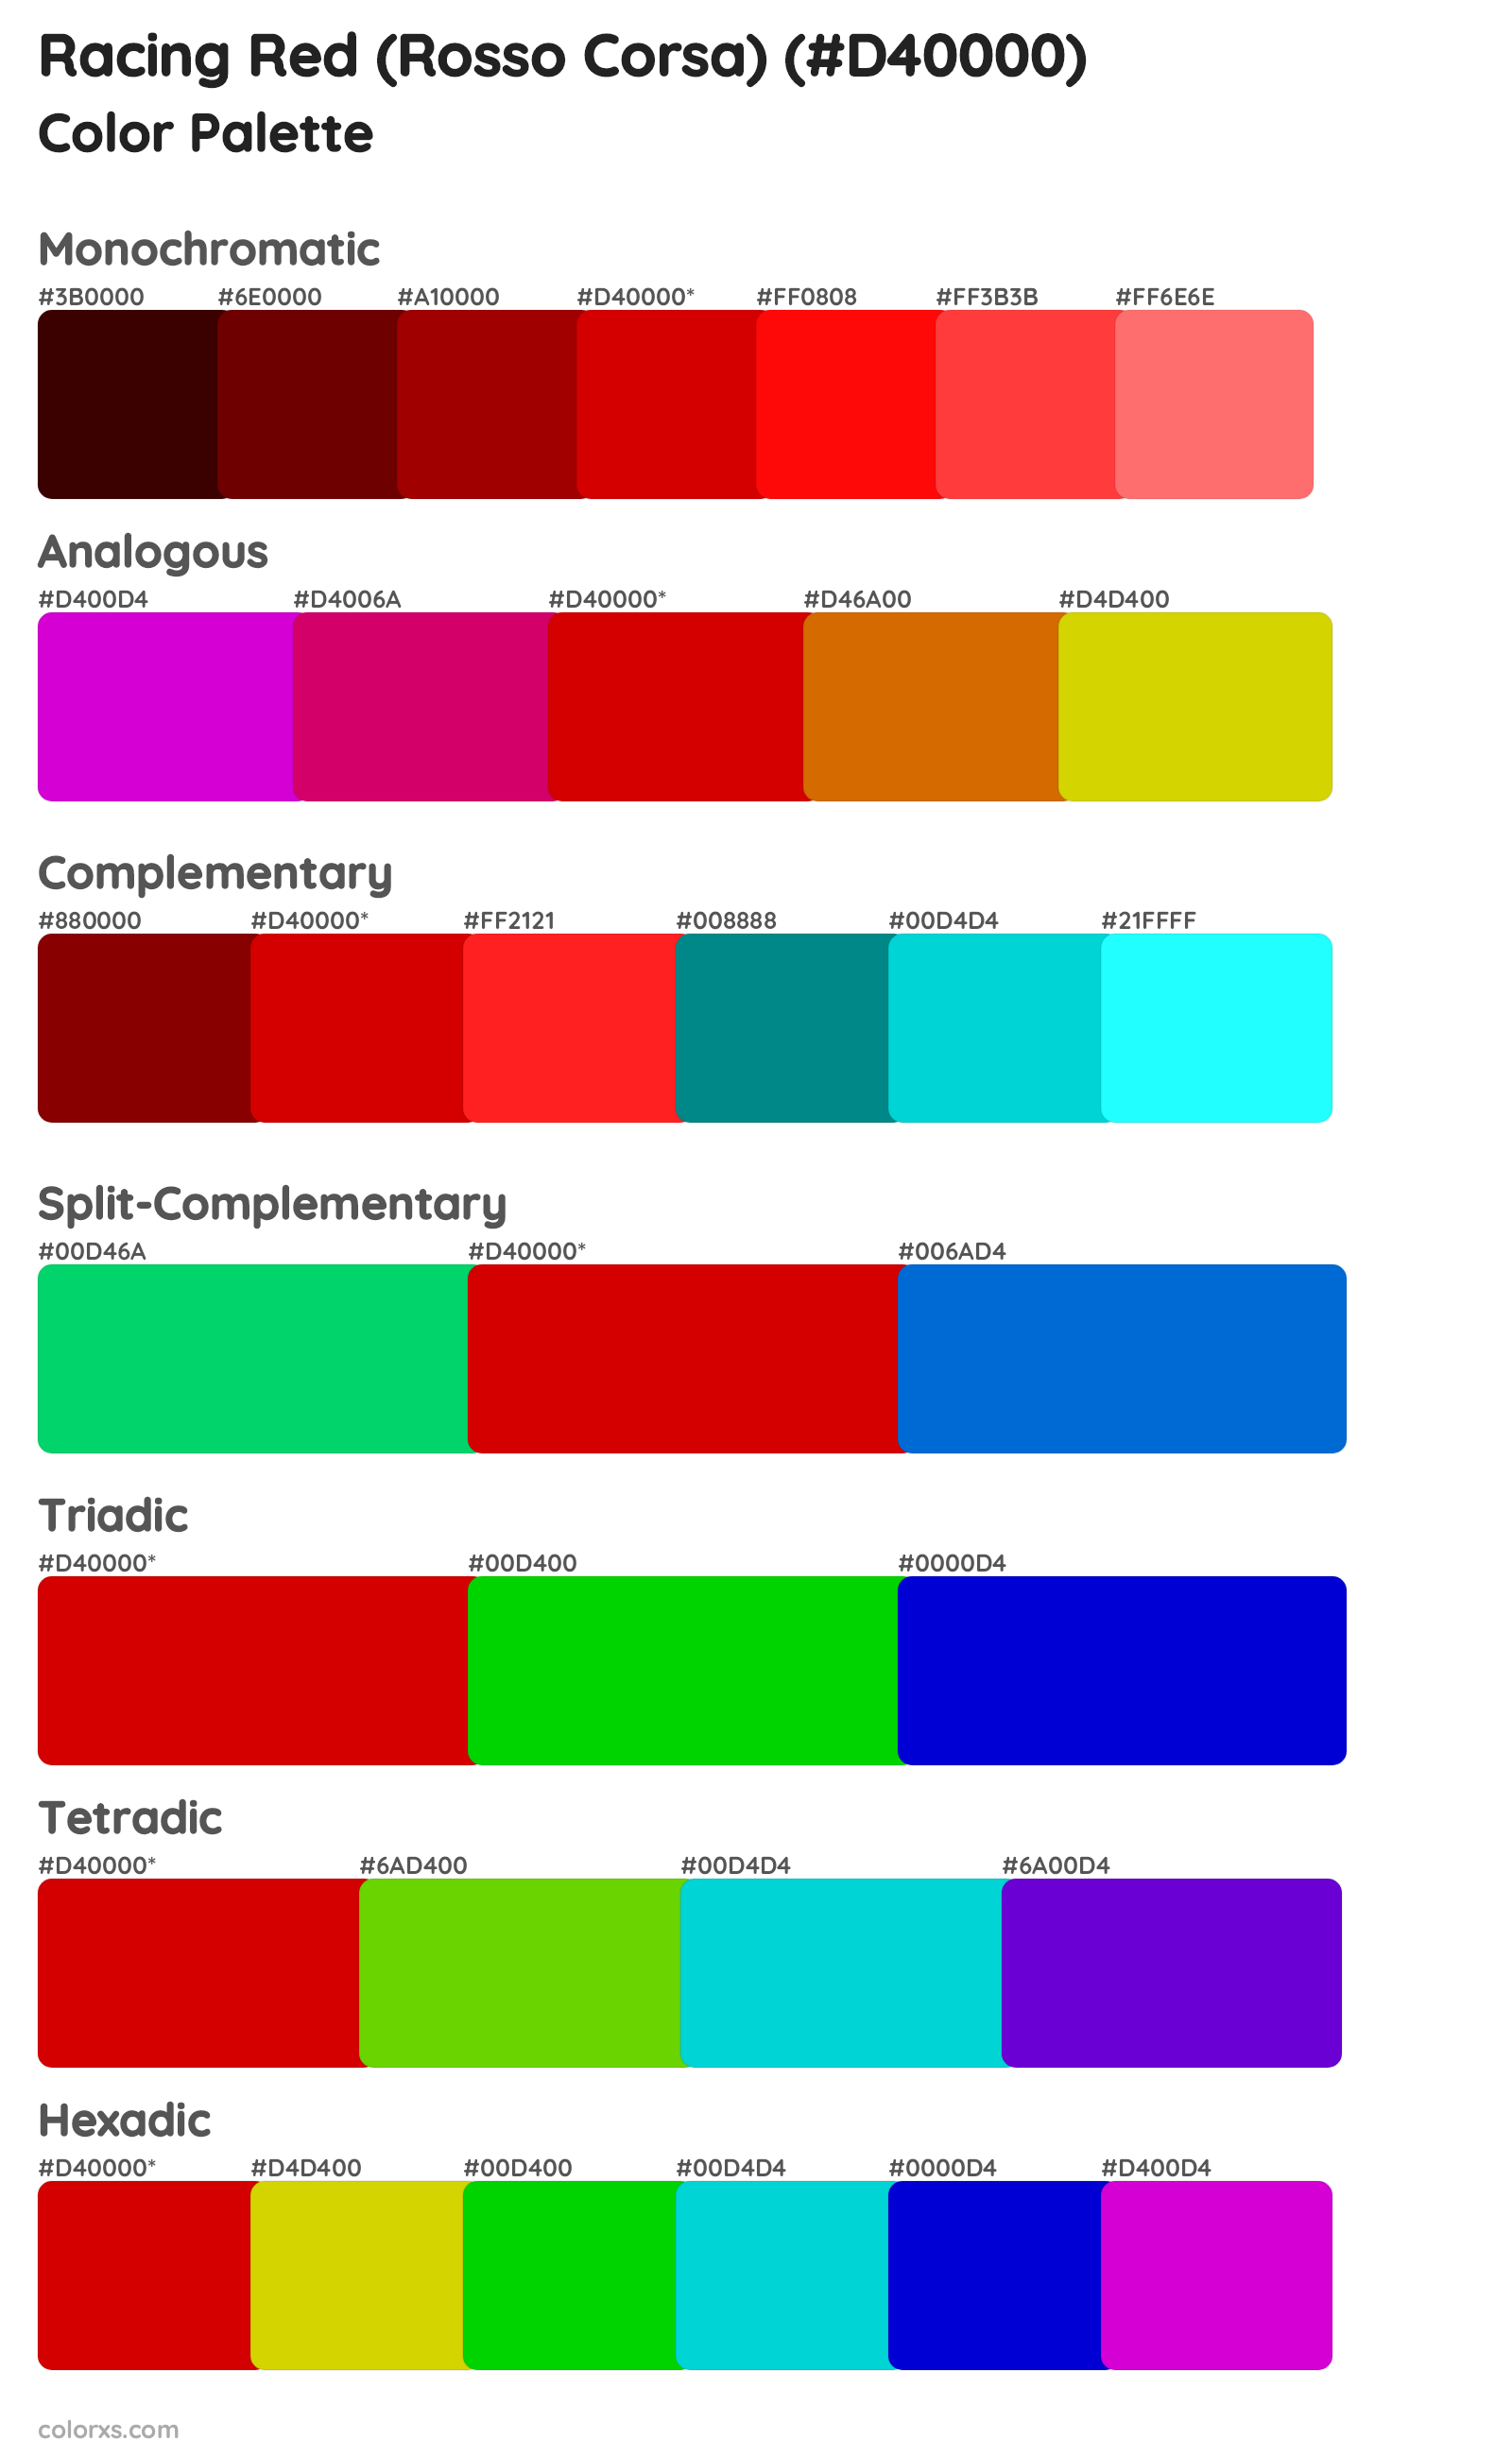 Racing Red (Rosso Corsa) Color Scheme Palettes